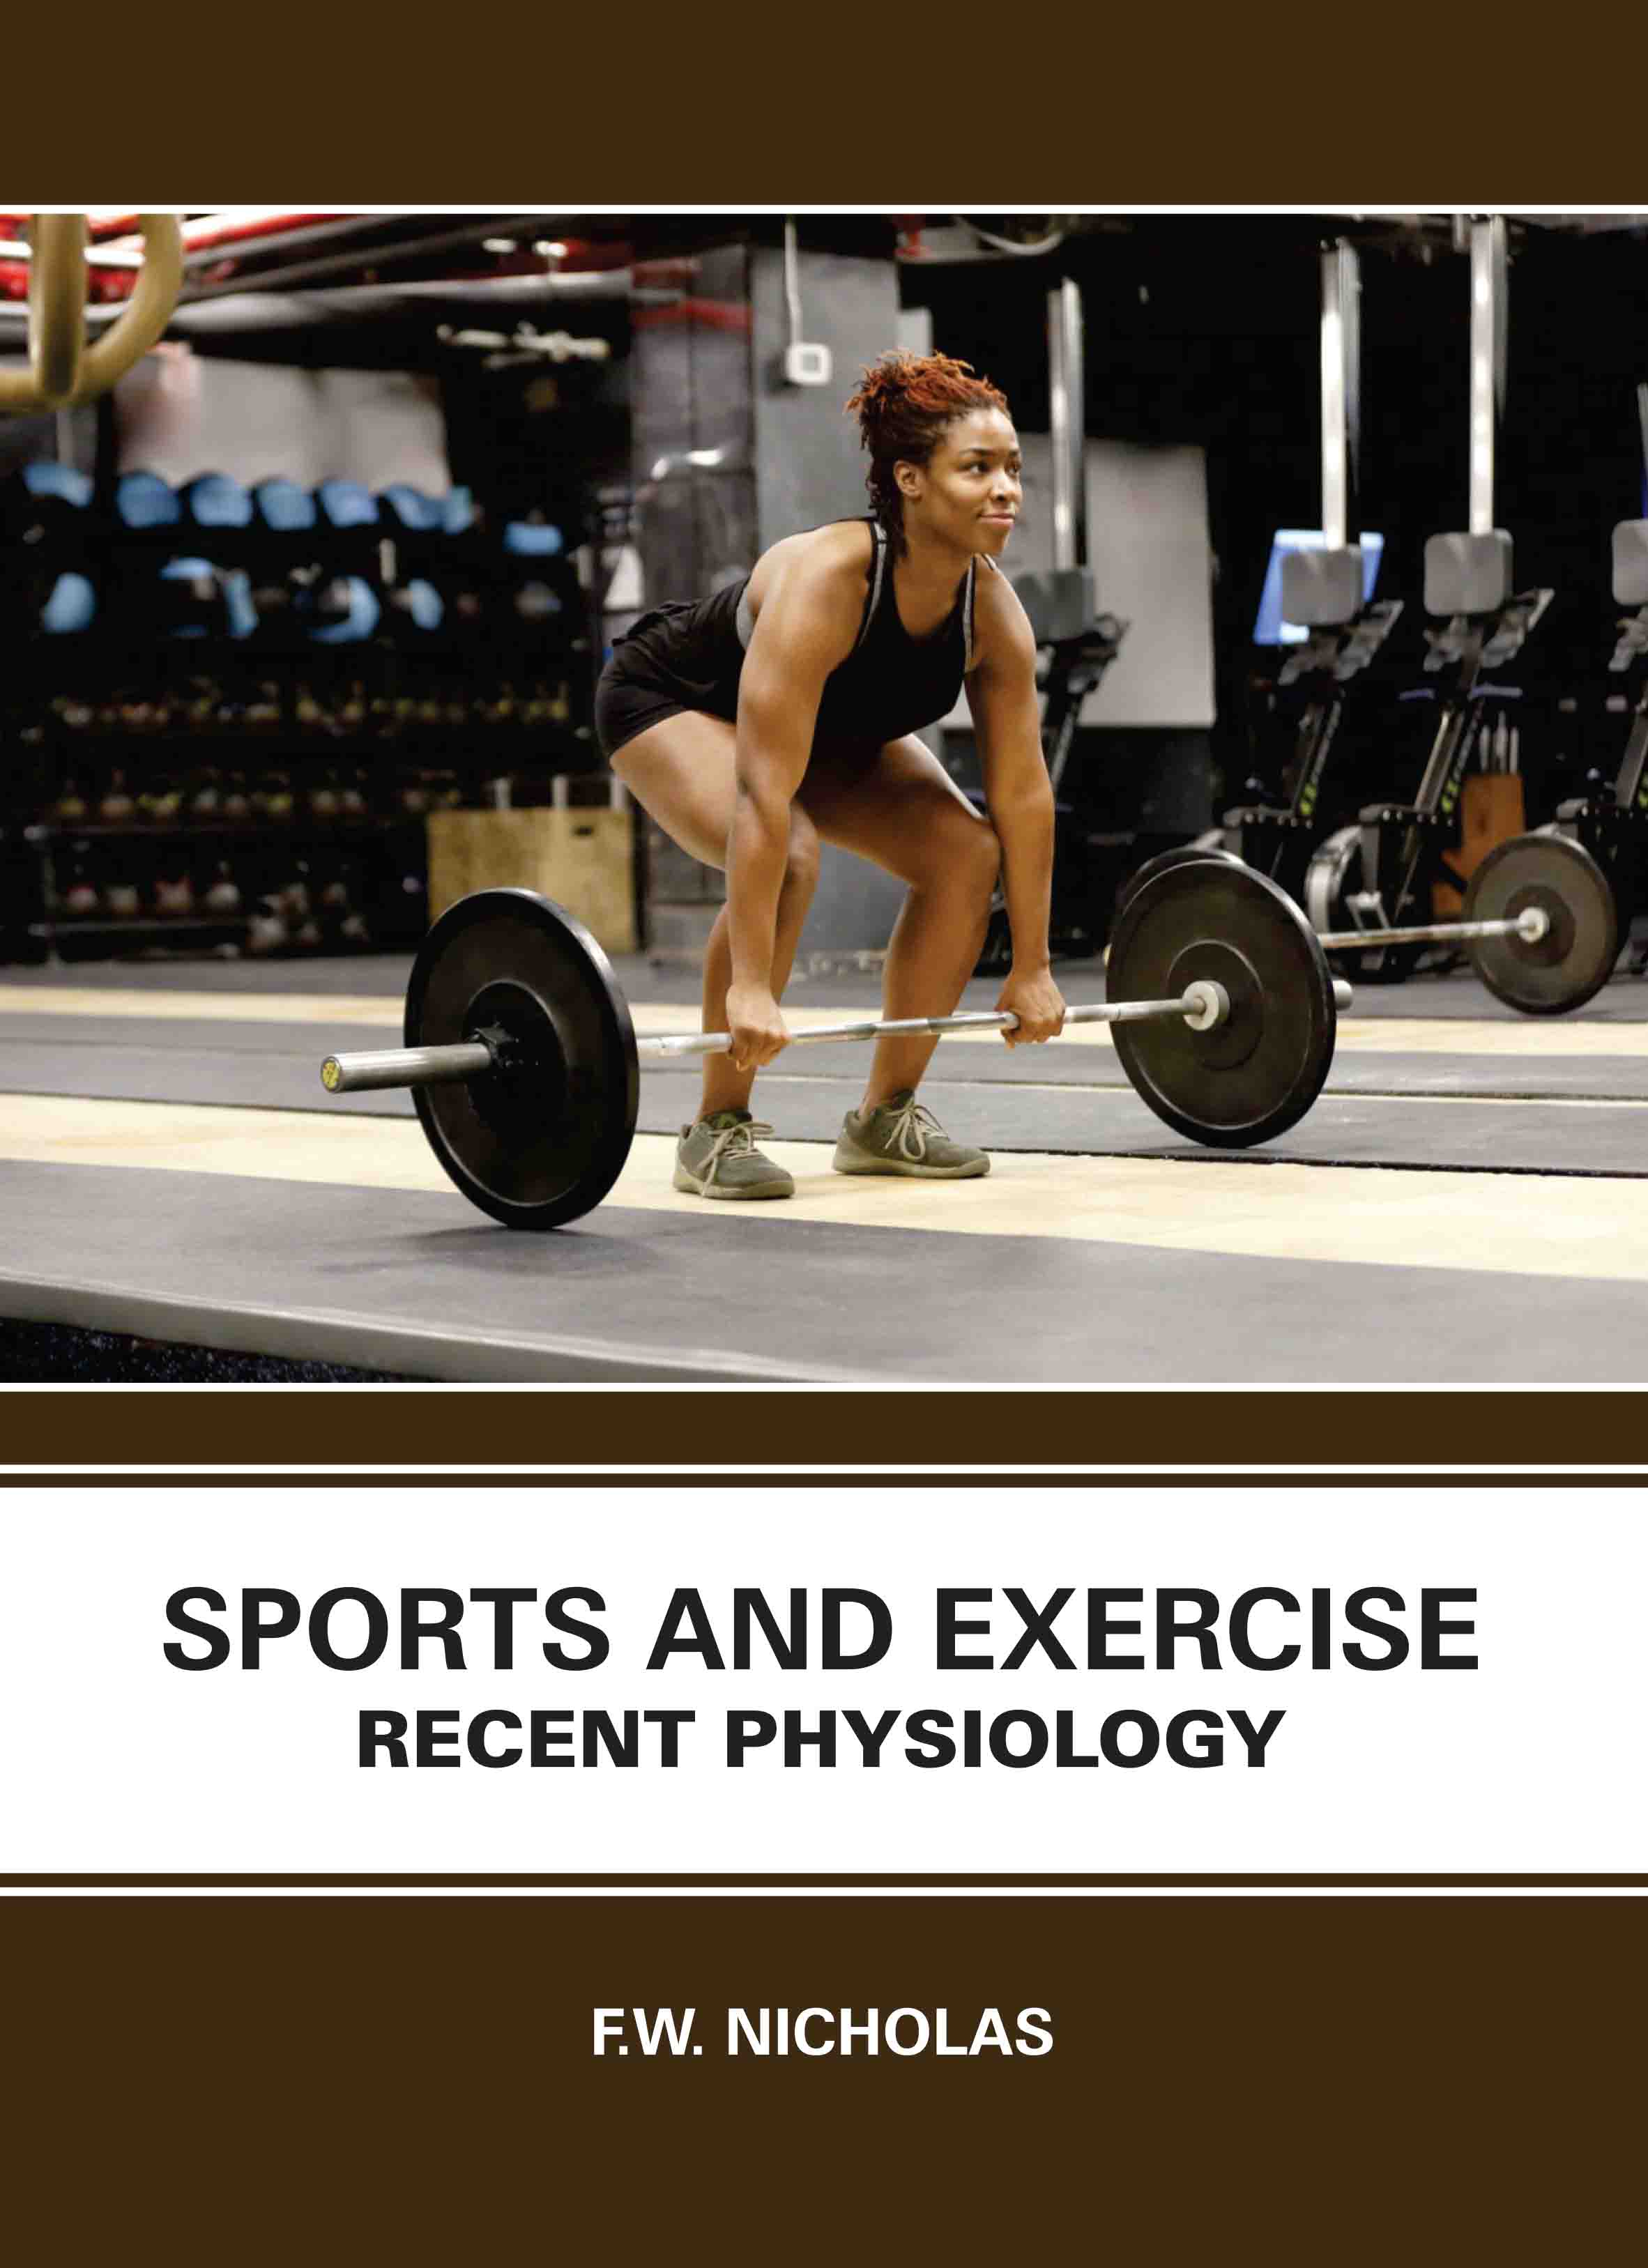 Sports and Exercise: Recent Physiology